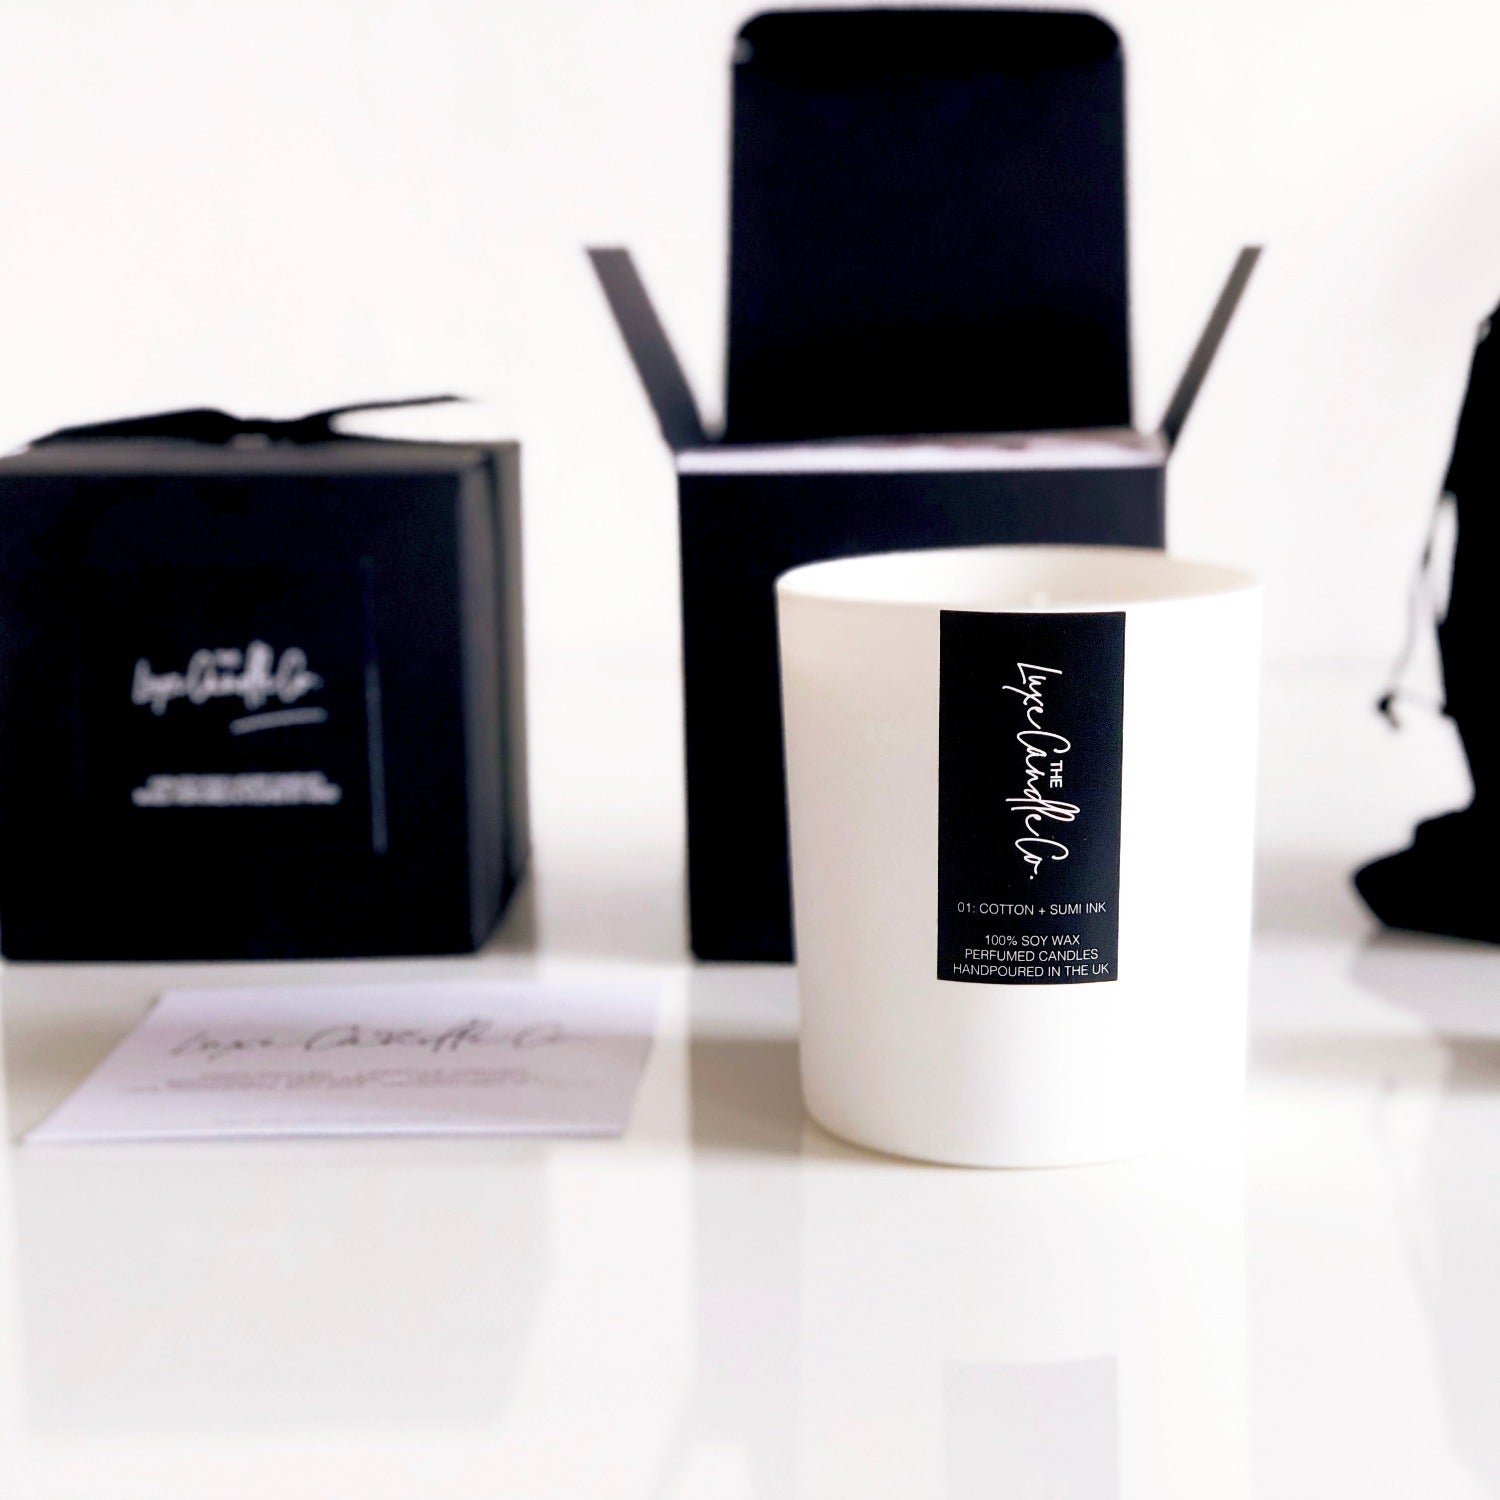 Luxury black and white soy wax candles for stylish monochrome interiors